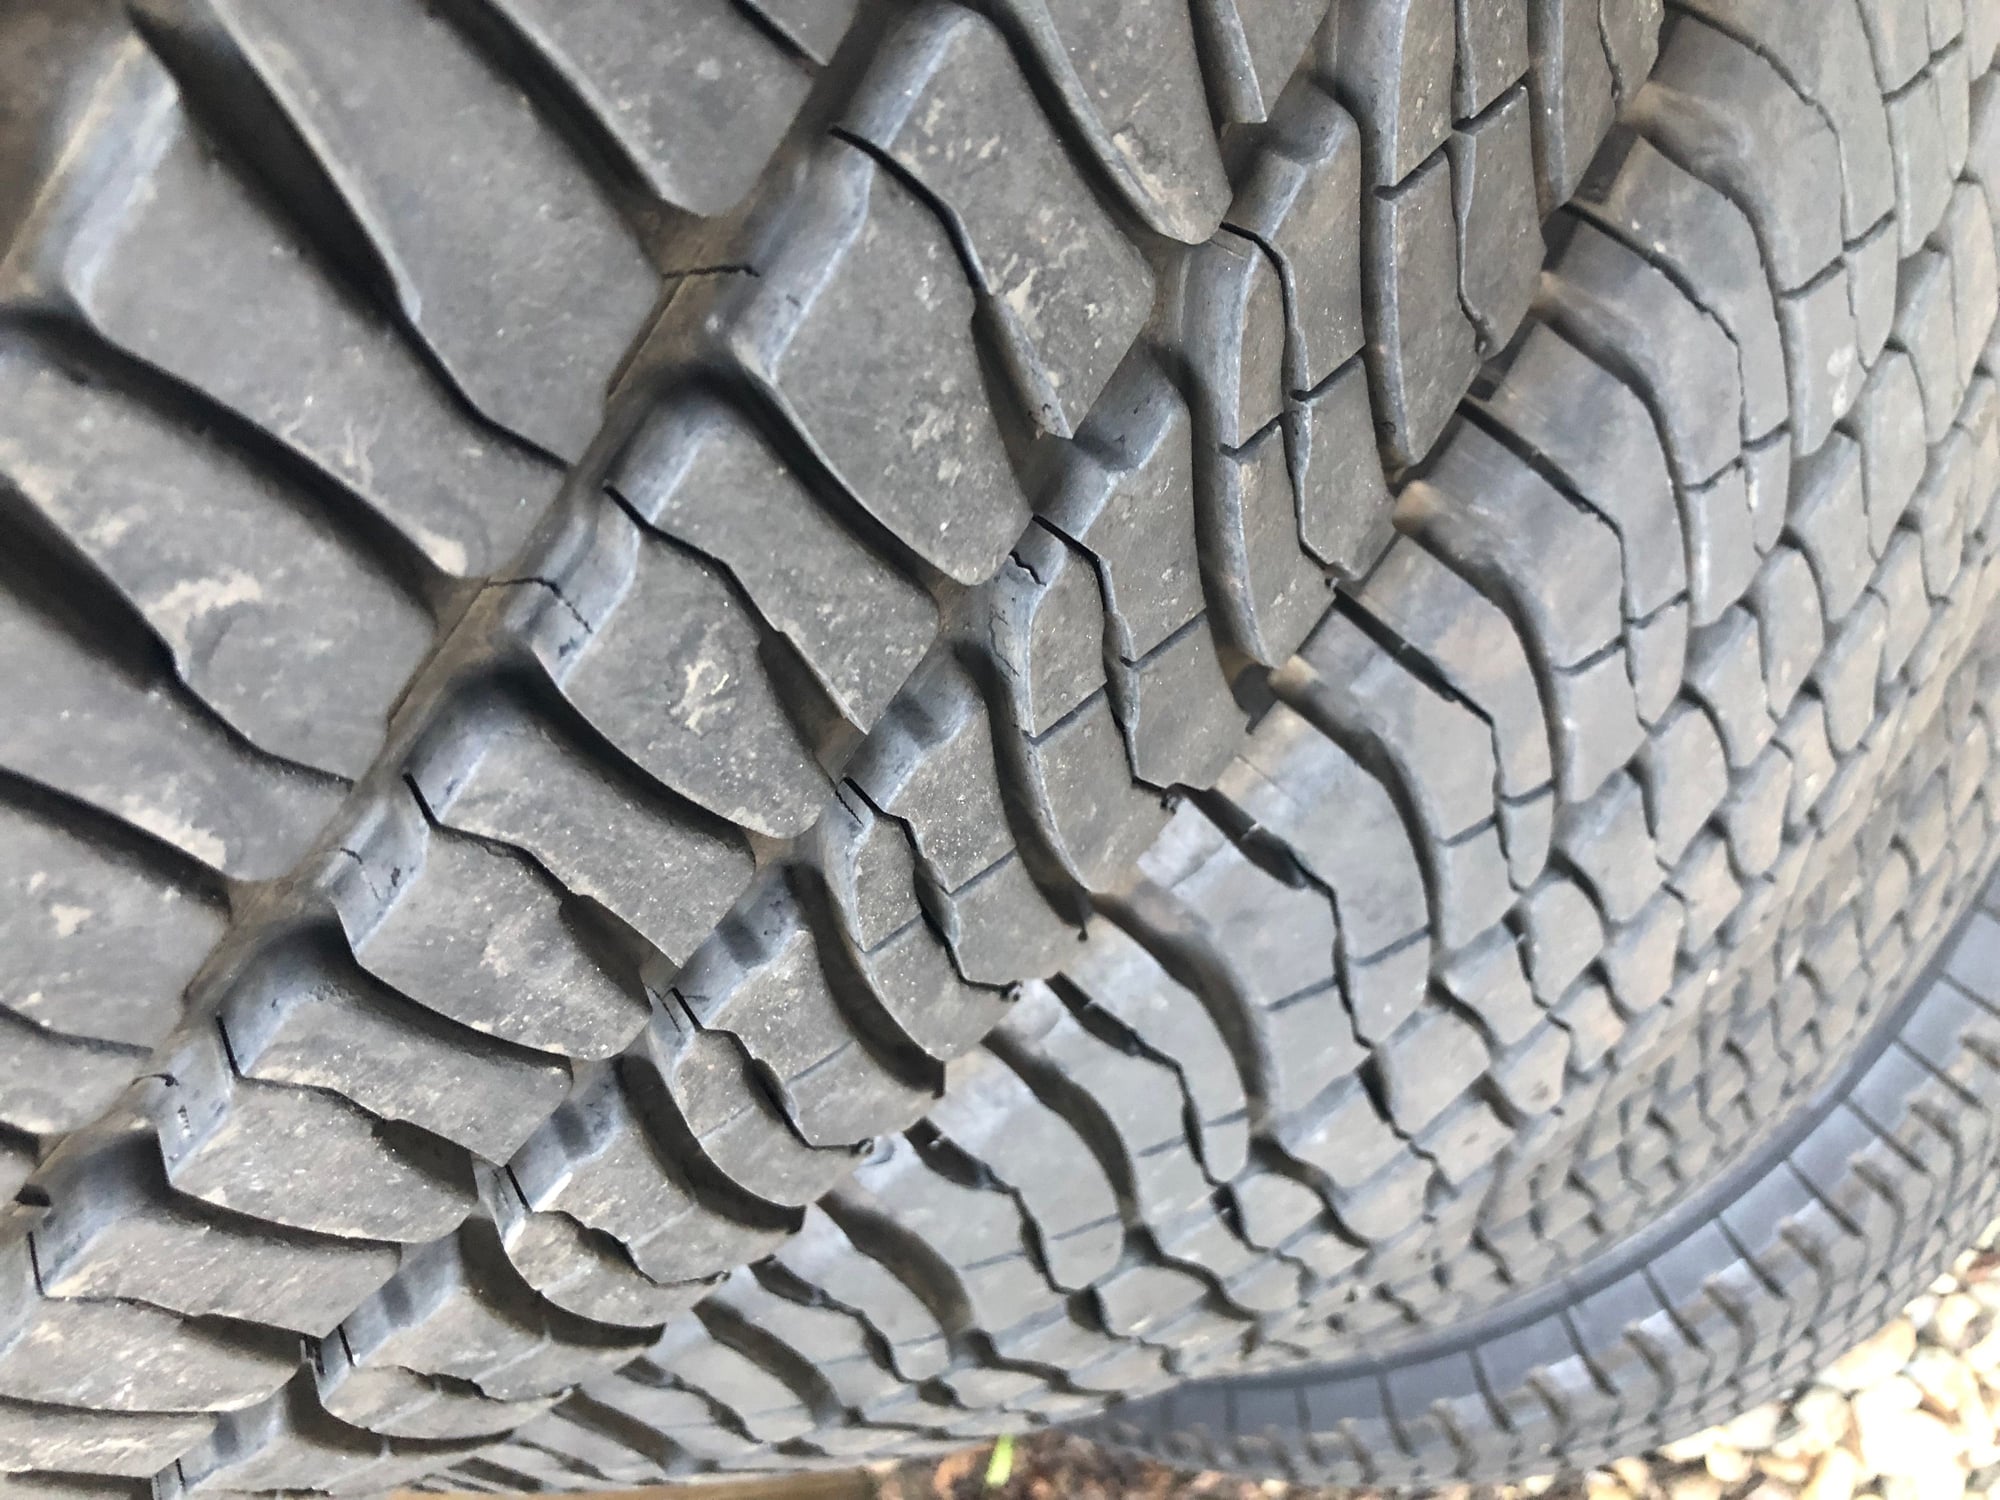 Wheels and Tires/Axles - Michelin LTX AT2 275/65R20 OWL Tires (Set of 4) - Used - 2000 to 2019 Ford All Models - Petaluma, CA 94954, United States